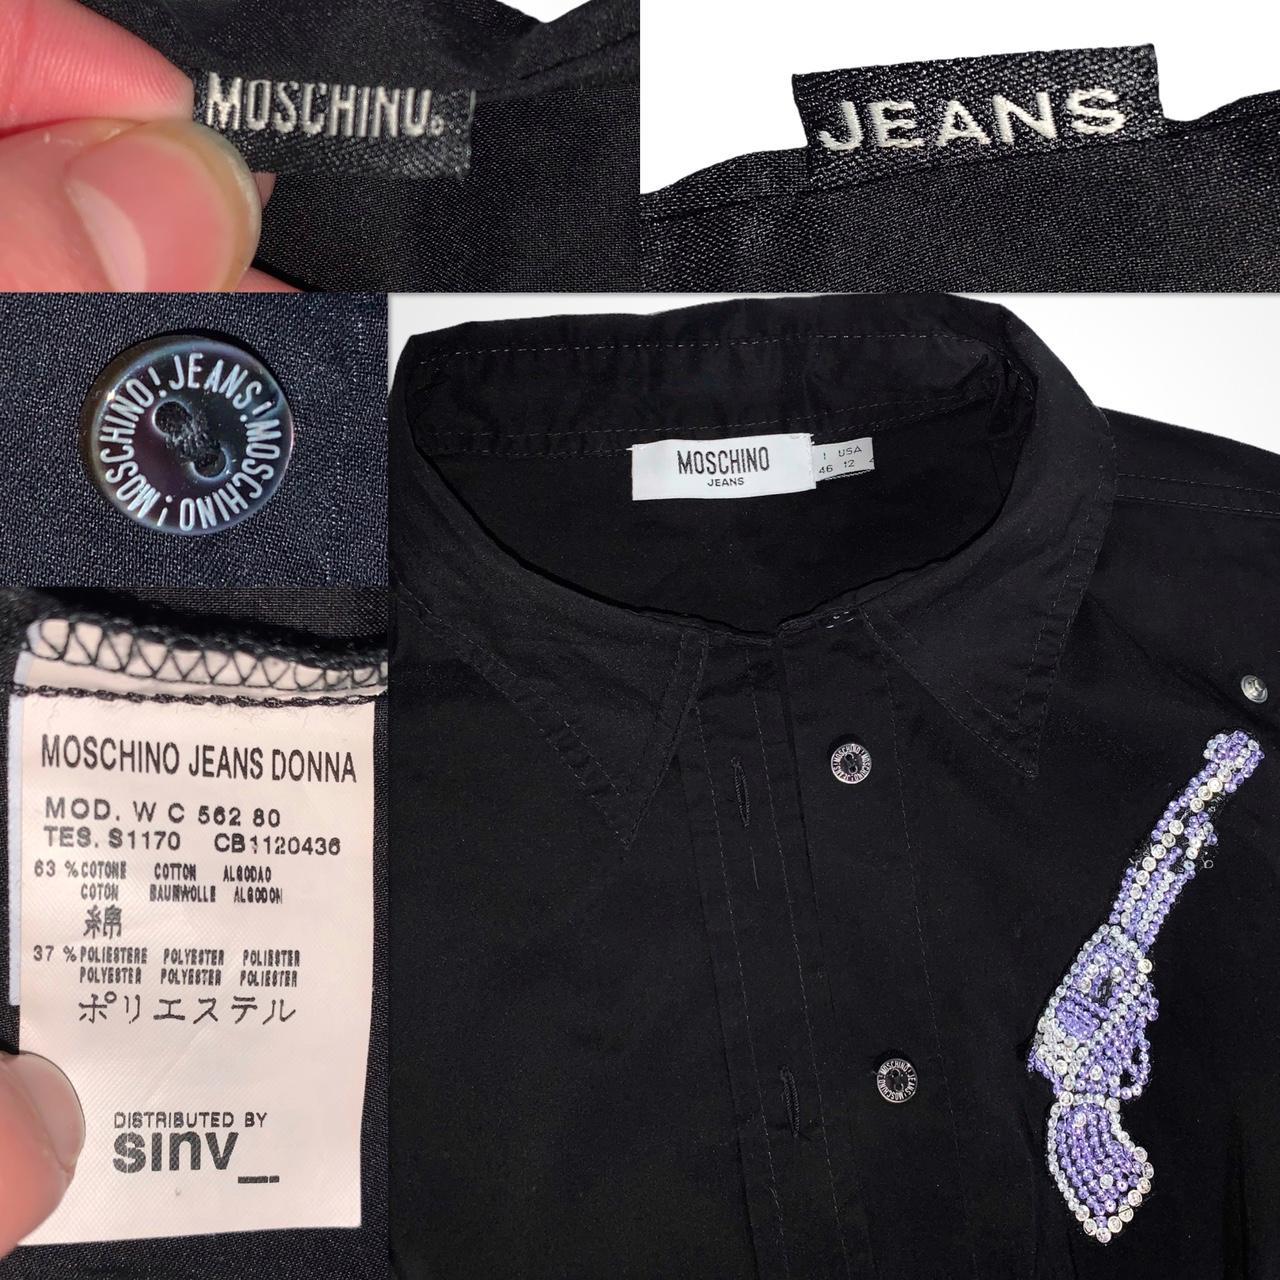 Vintage Moschino Jeans deadstock y2k long sleeved shirt with gun detail